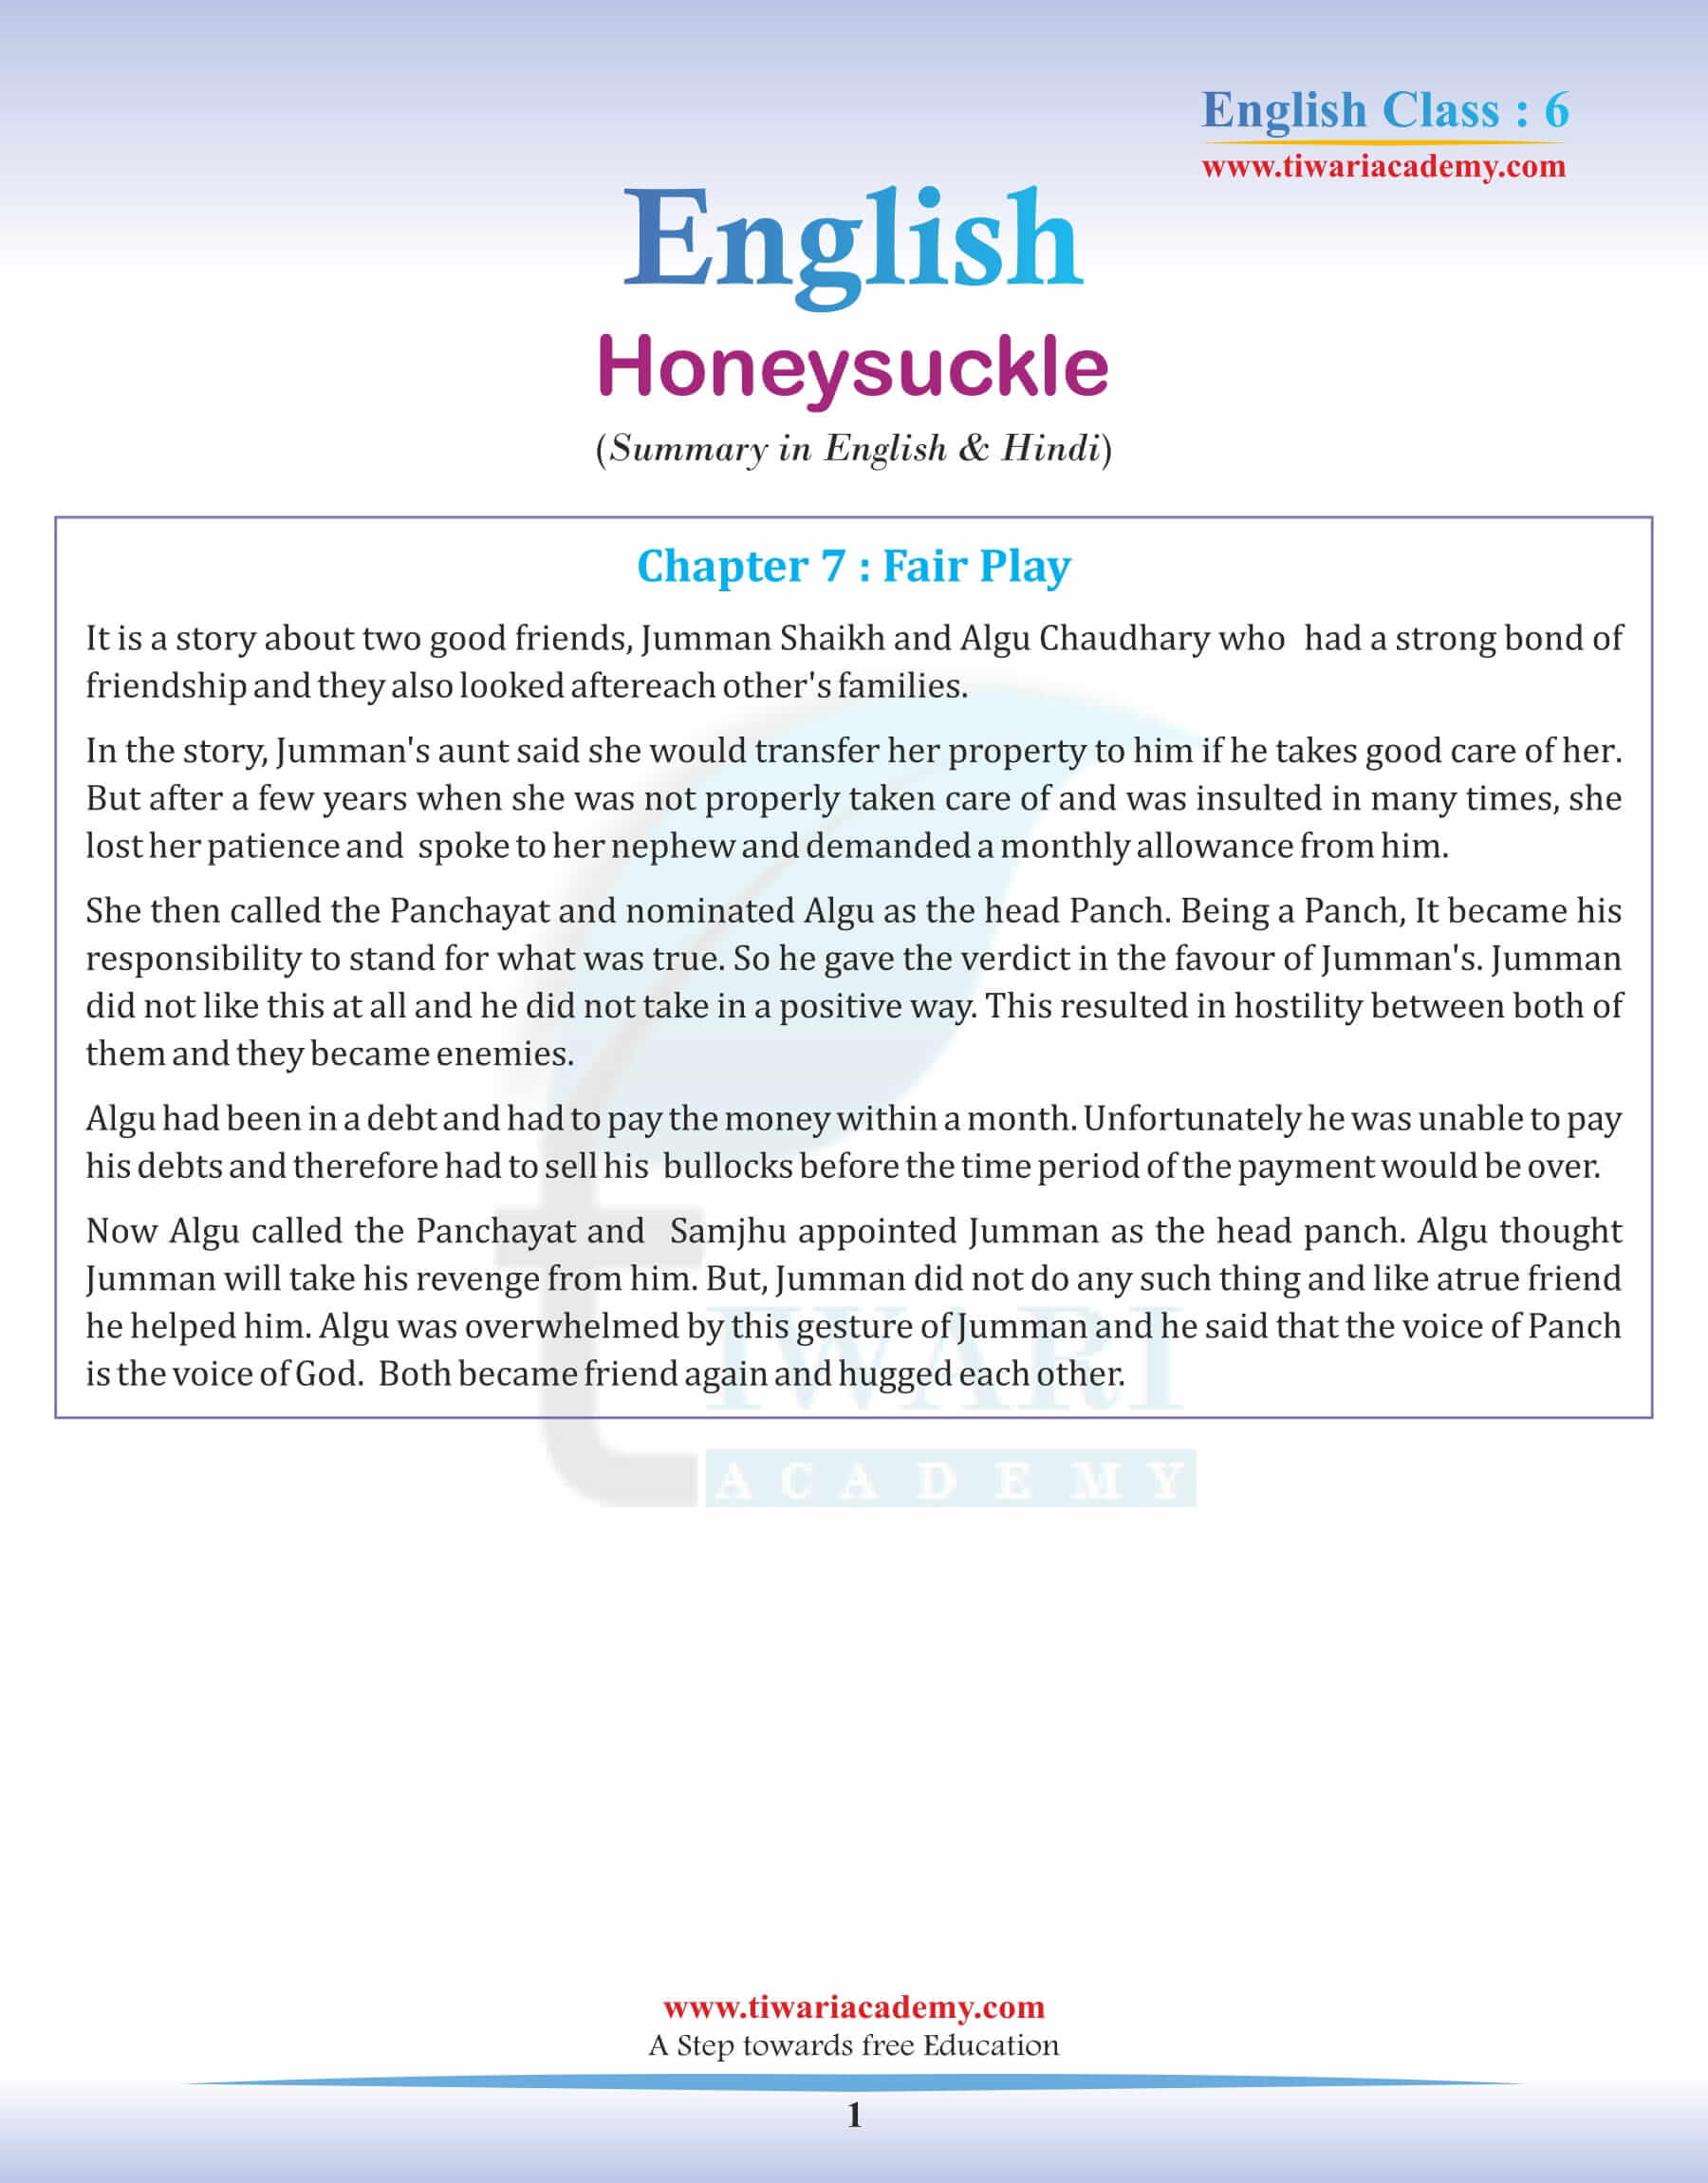 Class 6 English Chapter 7 Summary in English